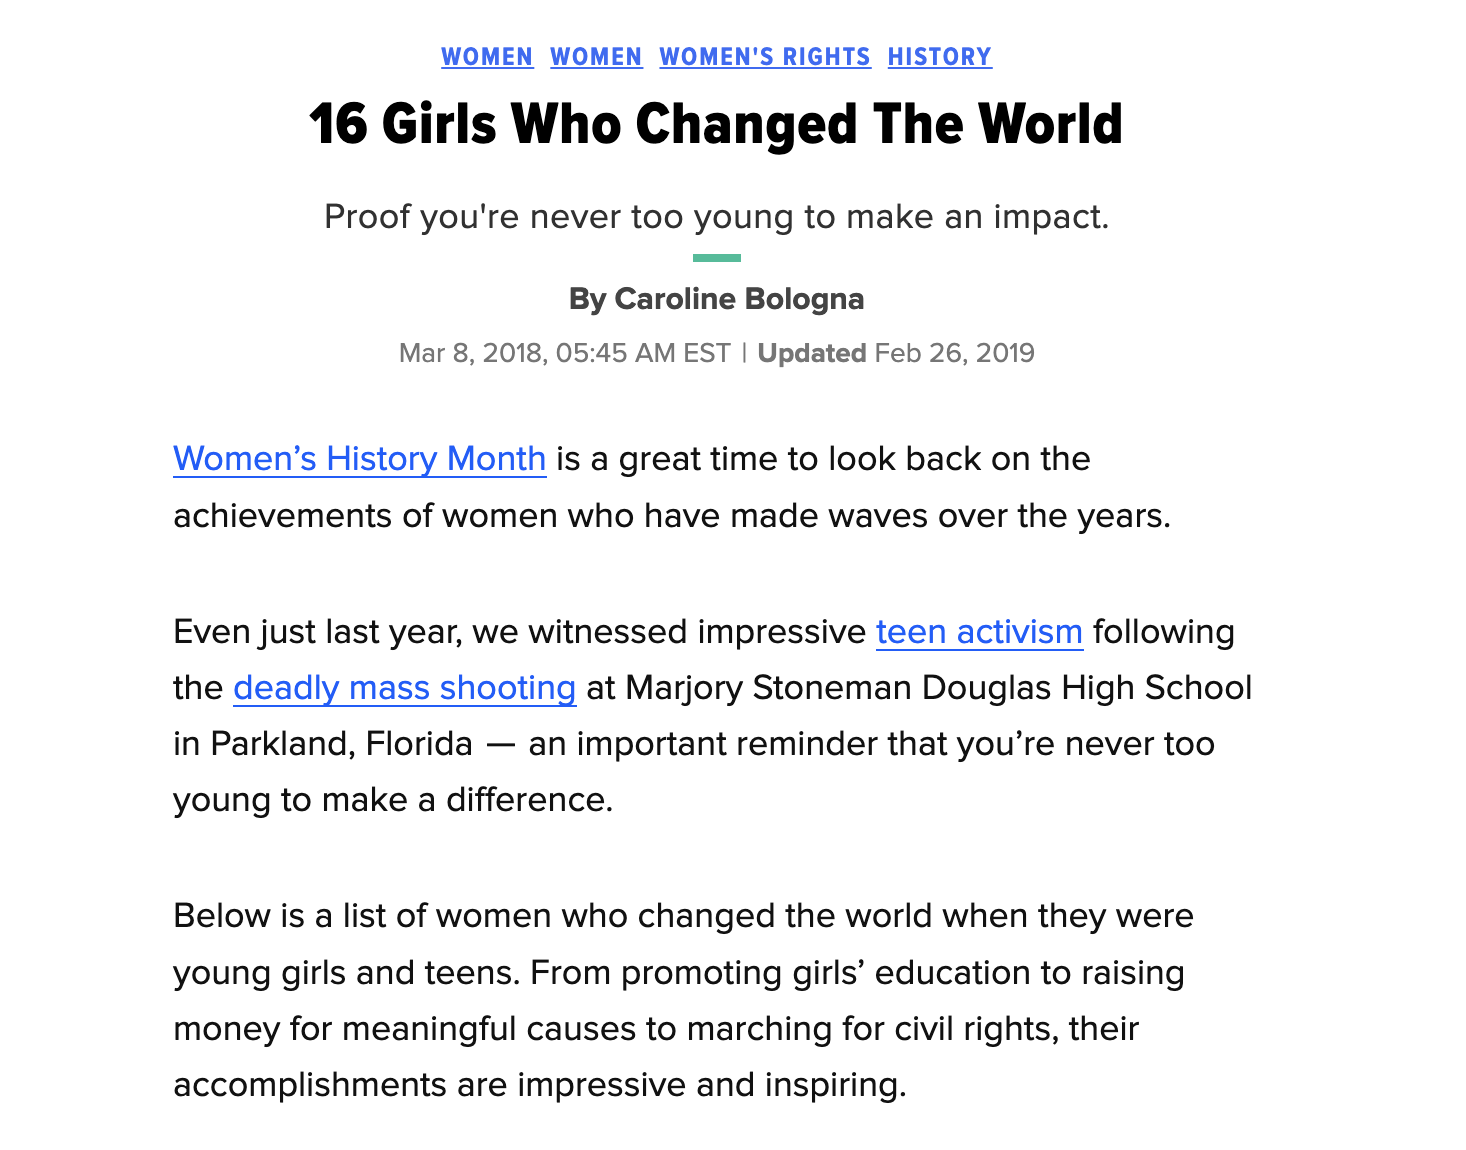 16 Girls Who Changed the World